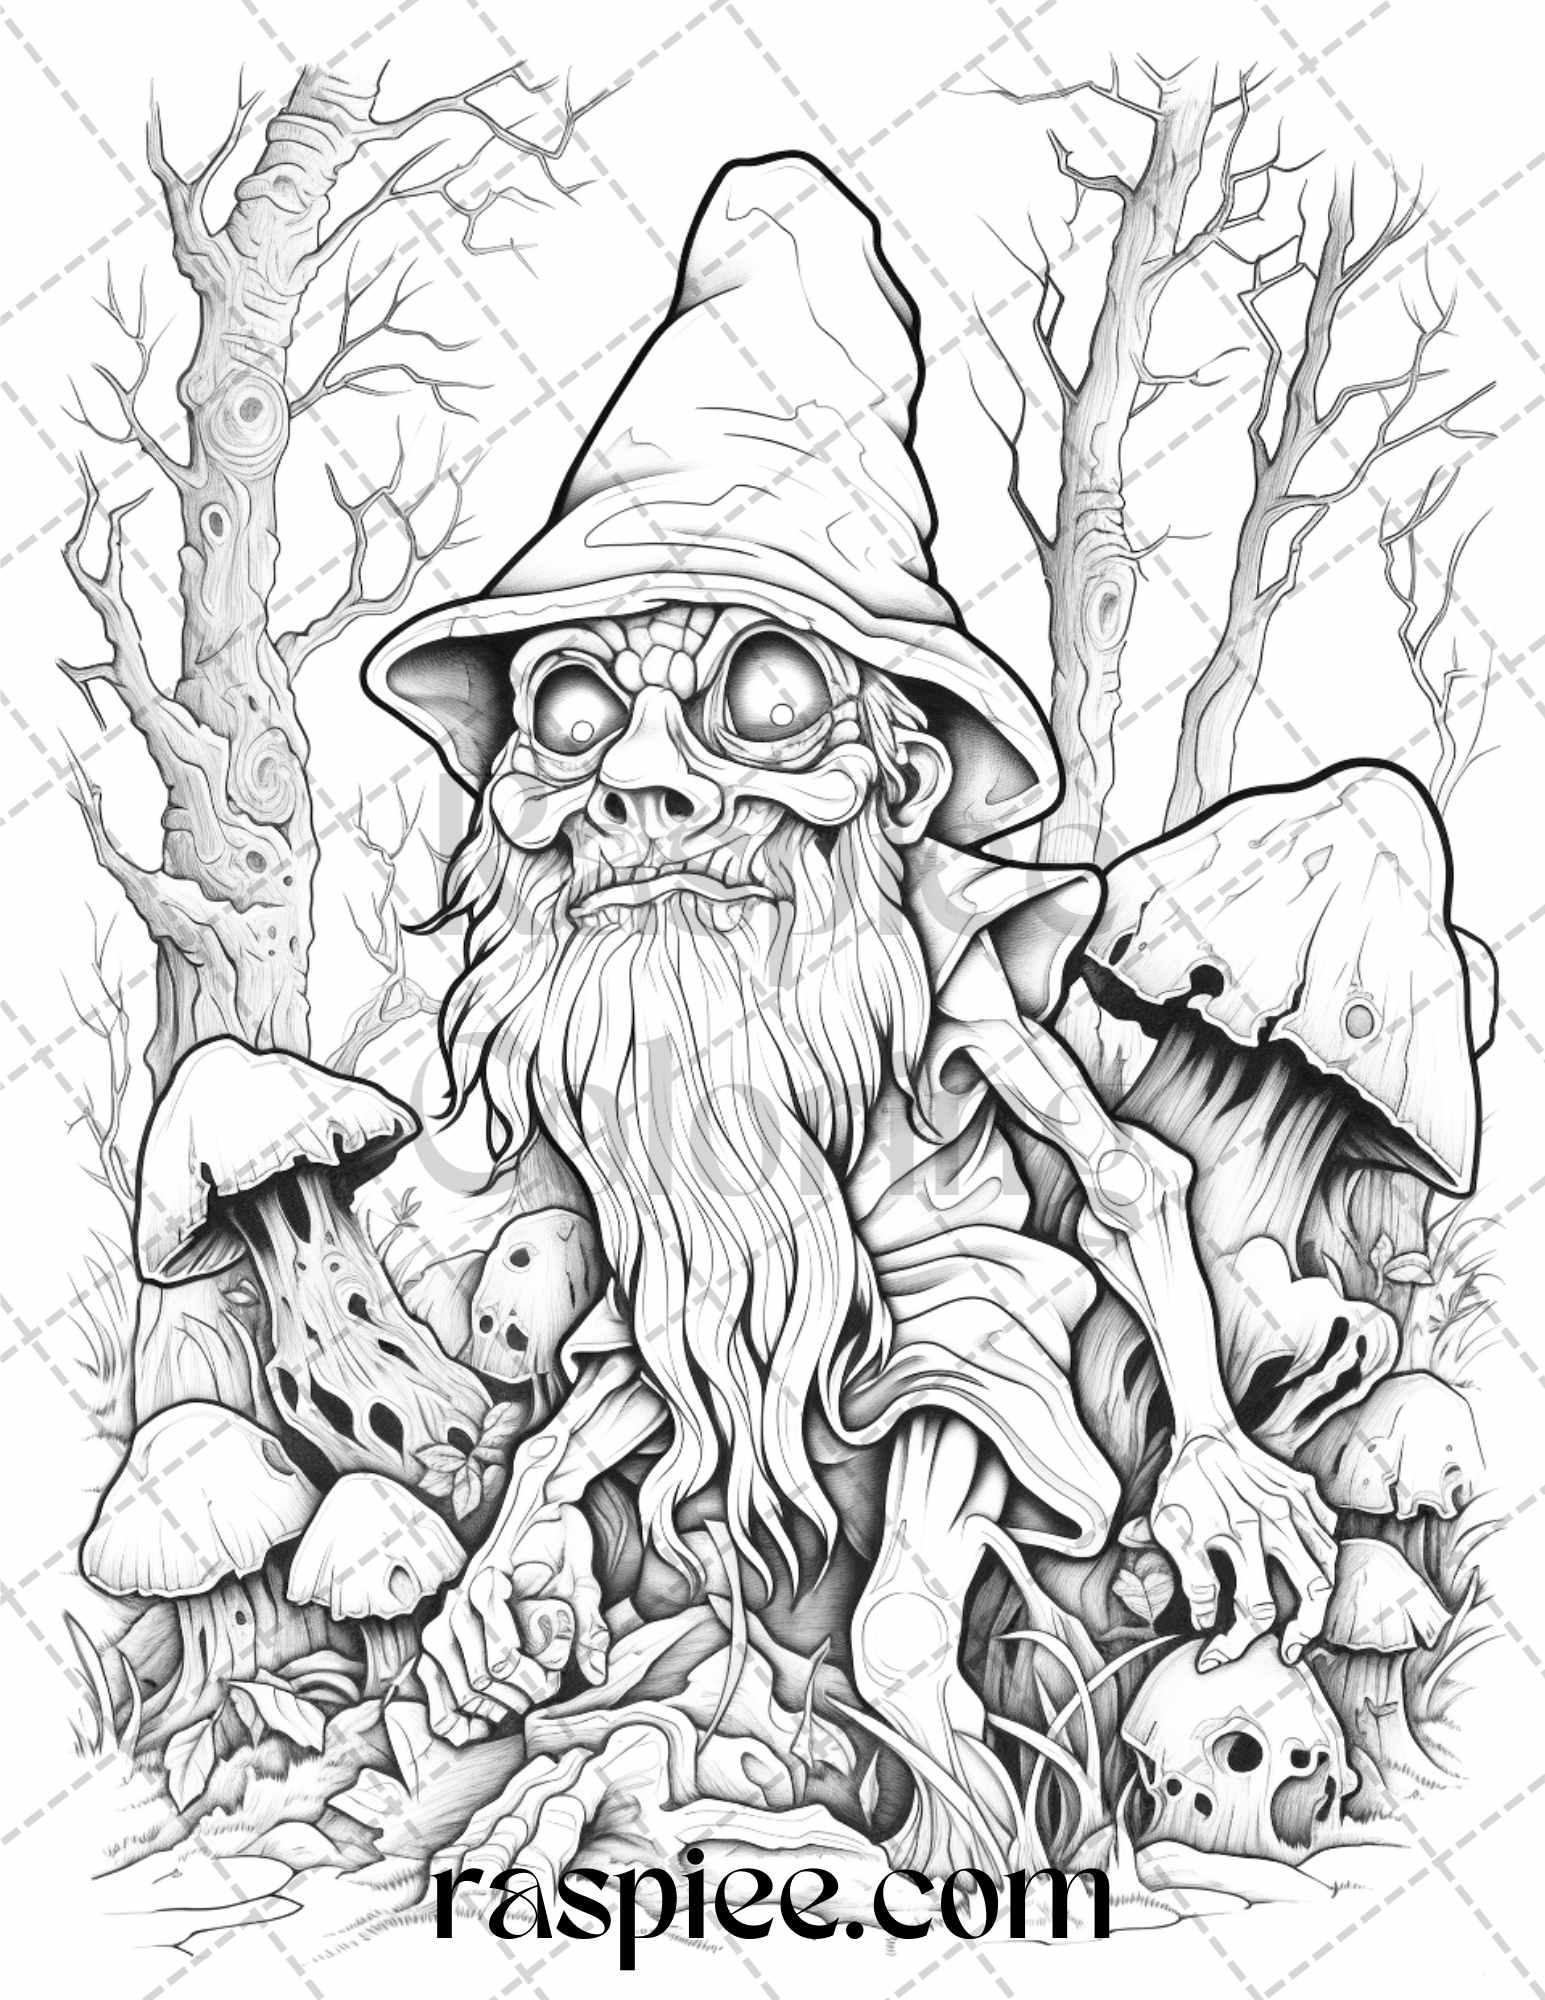 50 Horror Zombie Gnomes Grayscale Coloring Pages Printable for Adults, PDF File Instant Download - raspiee